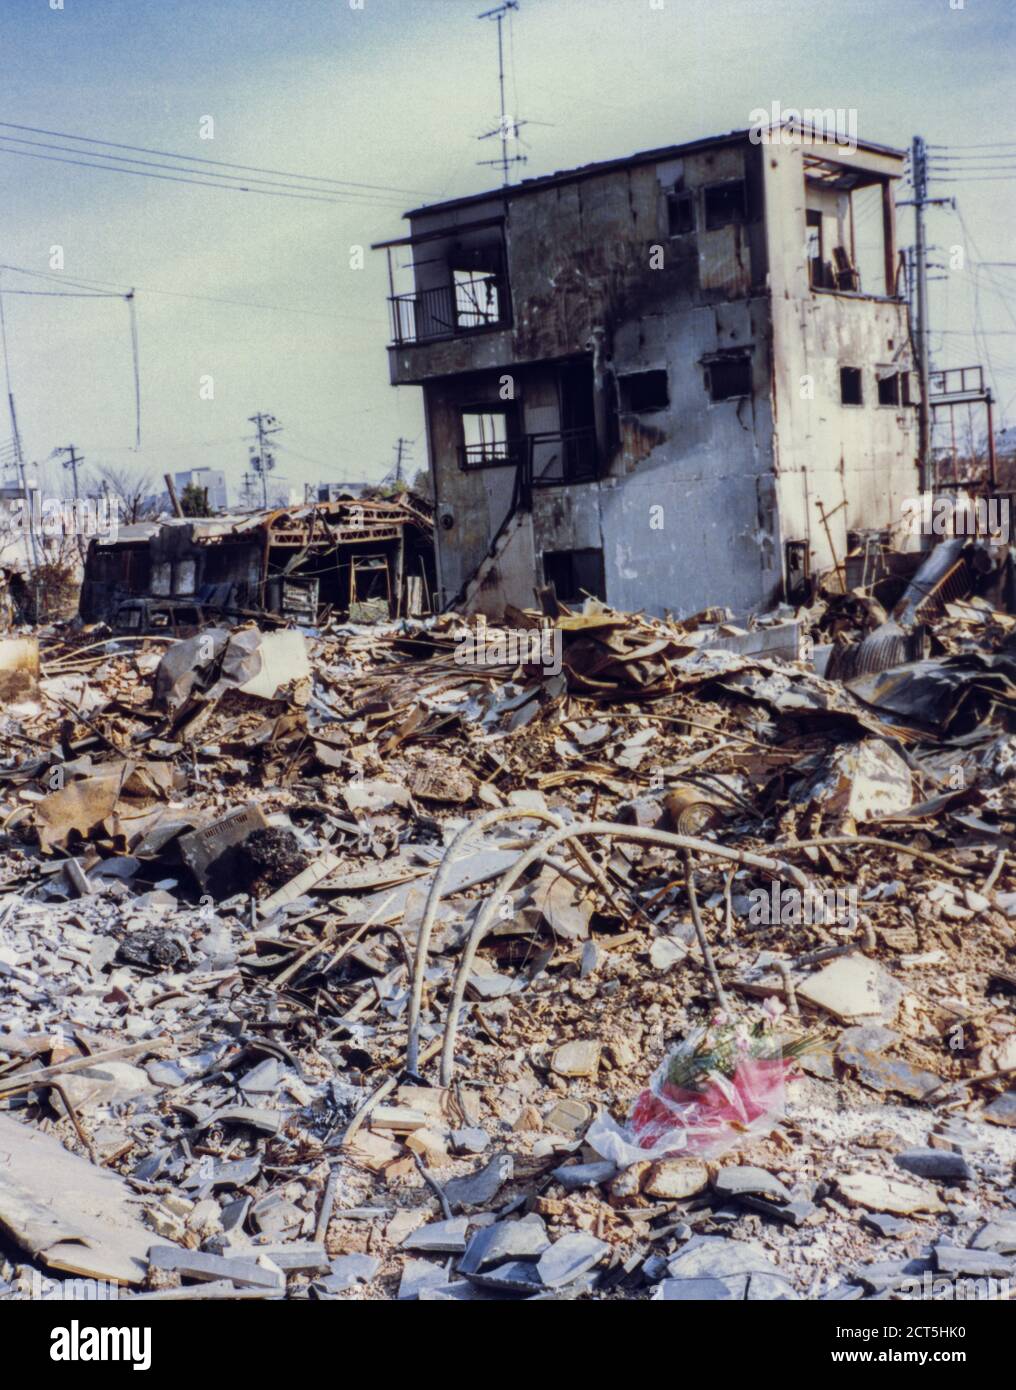 Bouquet of flowers laid in the rubble aftermath of the 1995 Great Hanshin Earthquake in Kobe, Japan Stock Photo